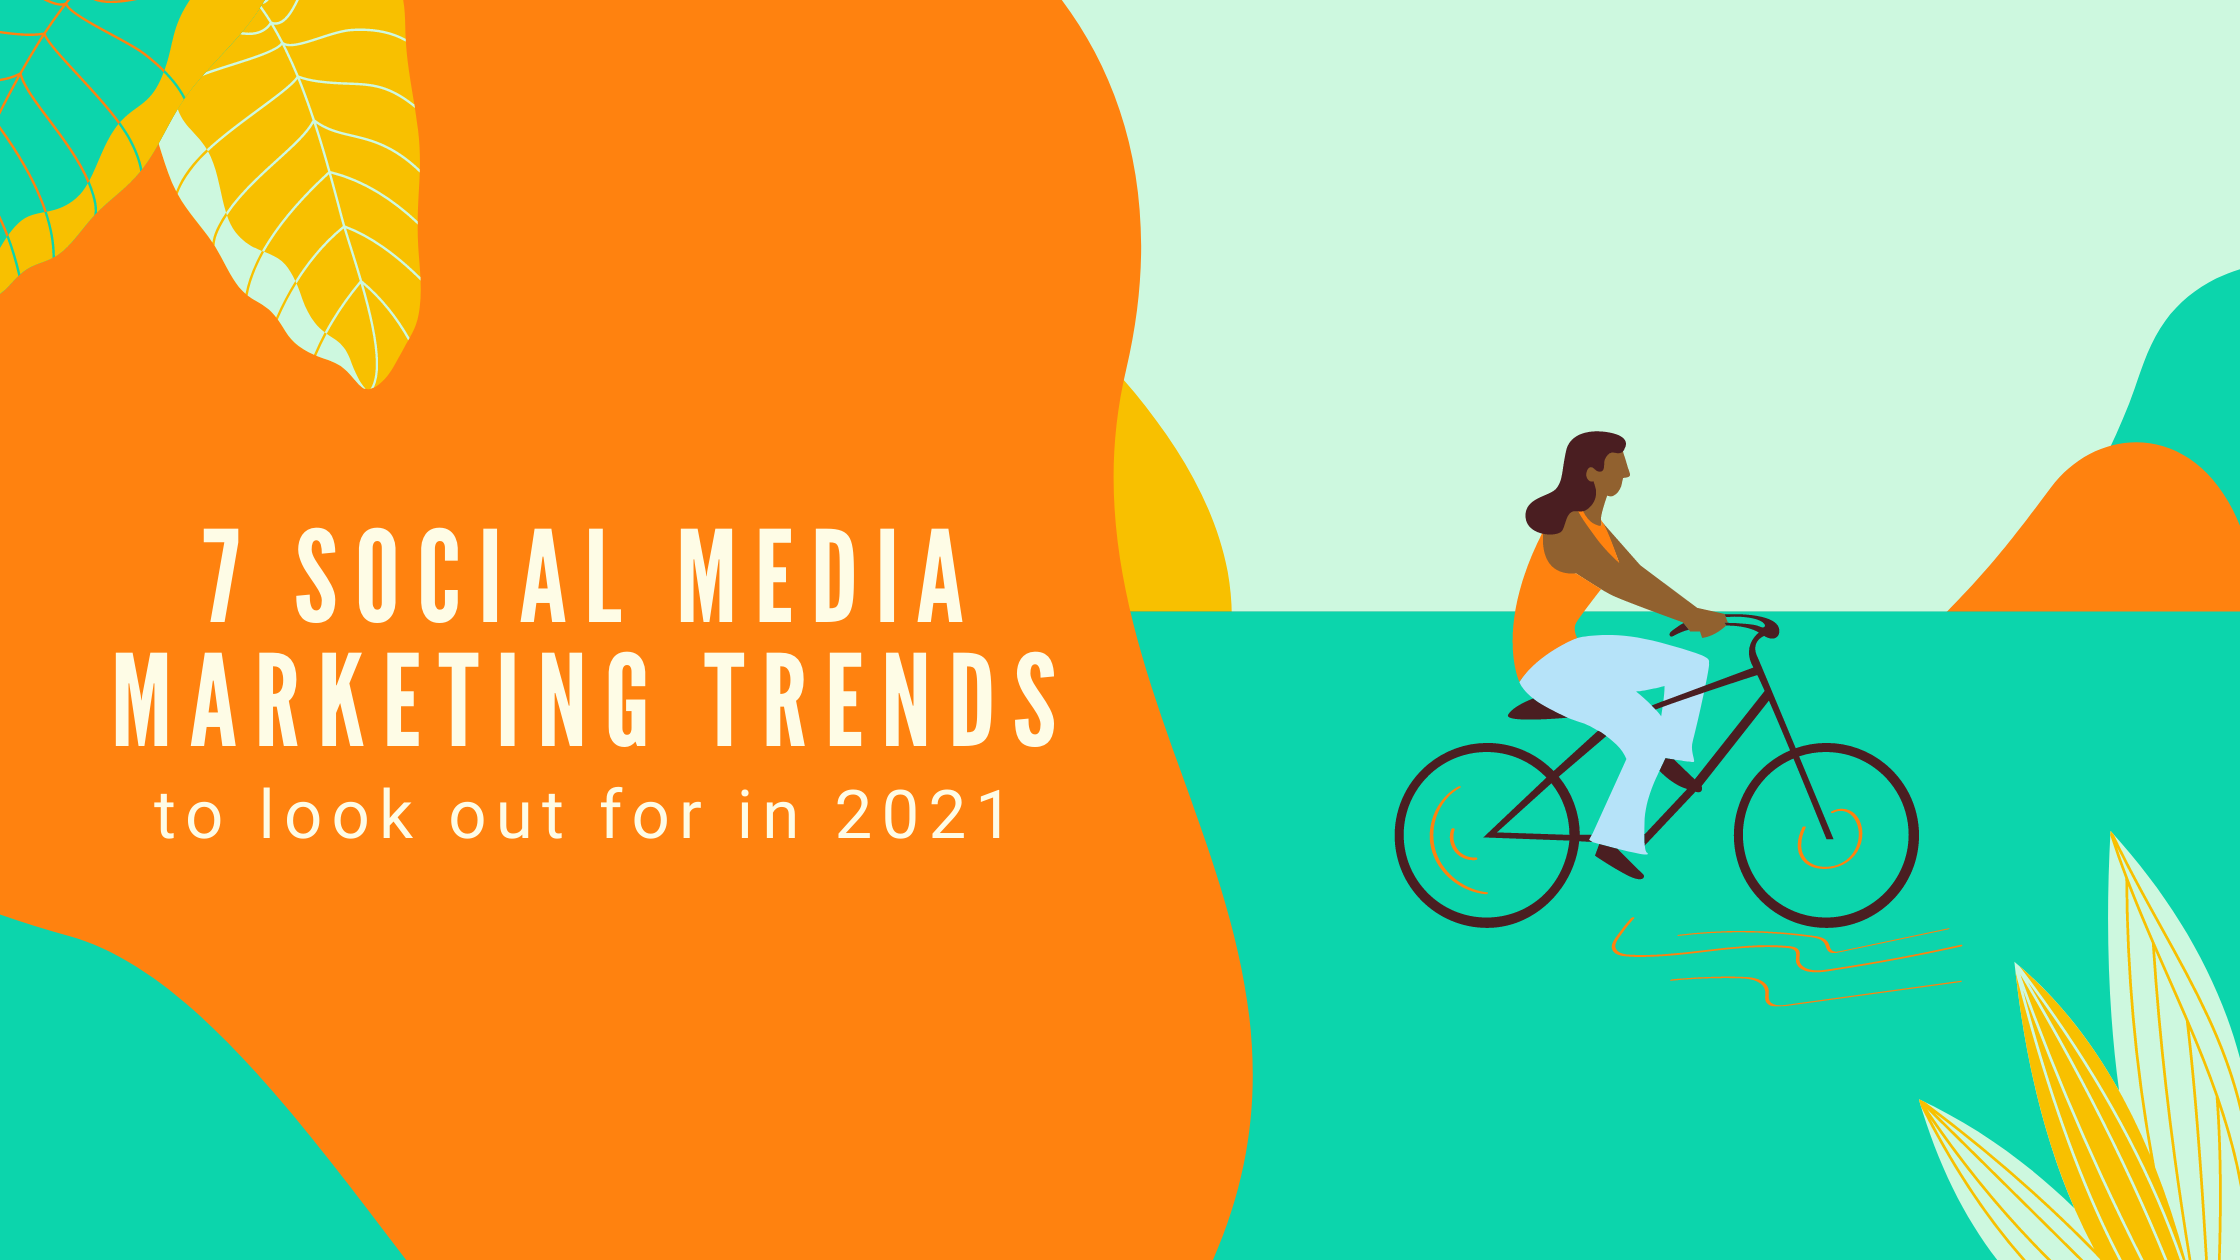 7 Social Media Marketing Trends to Look out for in 2021